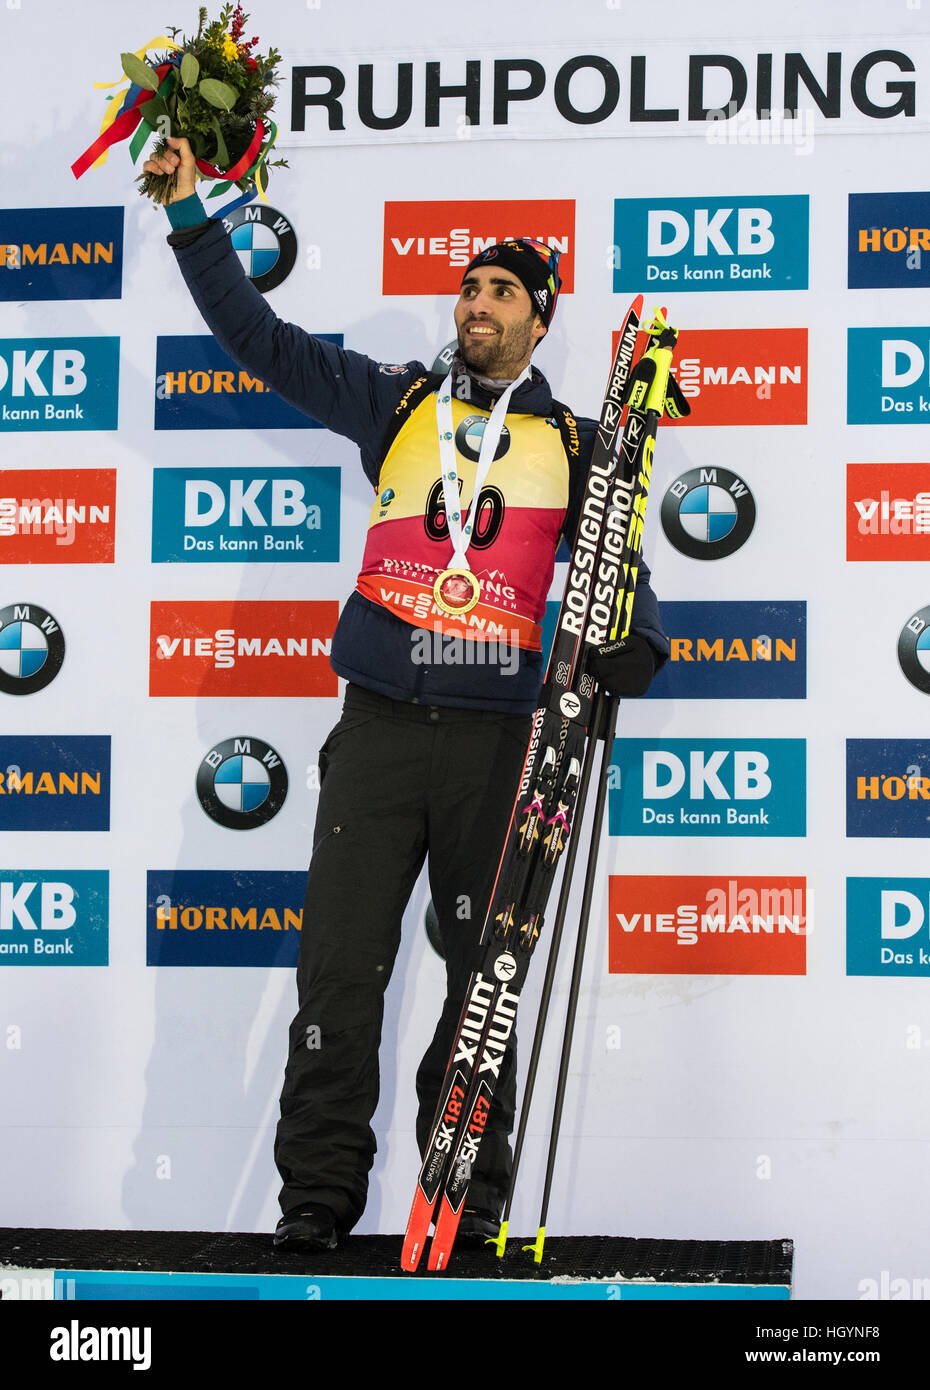 Ruhpolding, Germany. 13th Jan, 2017.  French biathlete Martin Fourcade on the victors' podium after competing in the men's 10 kilometer sprint at the Biathlon World Cup in the Chiemgau Arena in Ruhpolding, Germany, 13 January 2017. Fourcade finished in 1st place, Eberhard in 2nd place and Svendsen in 3rd place. Photo: Matthias Balk/dpa/Alamy Live News Stock Photo